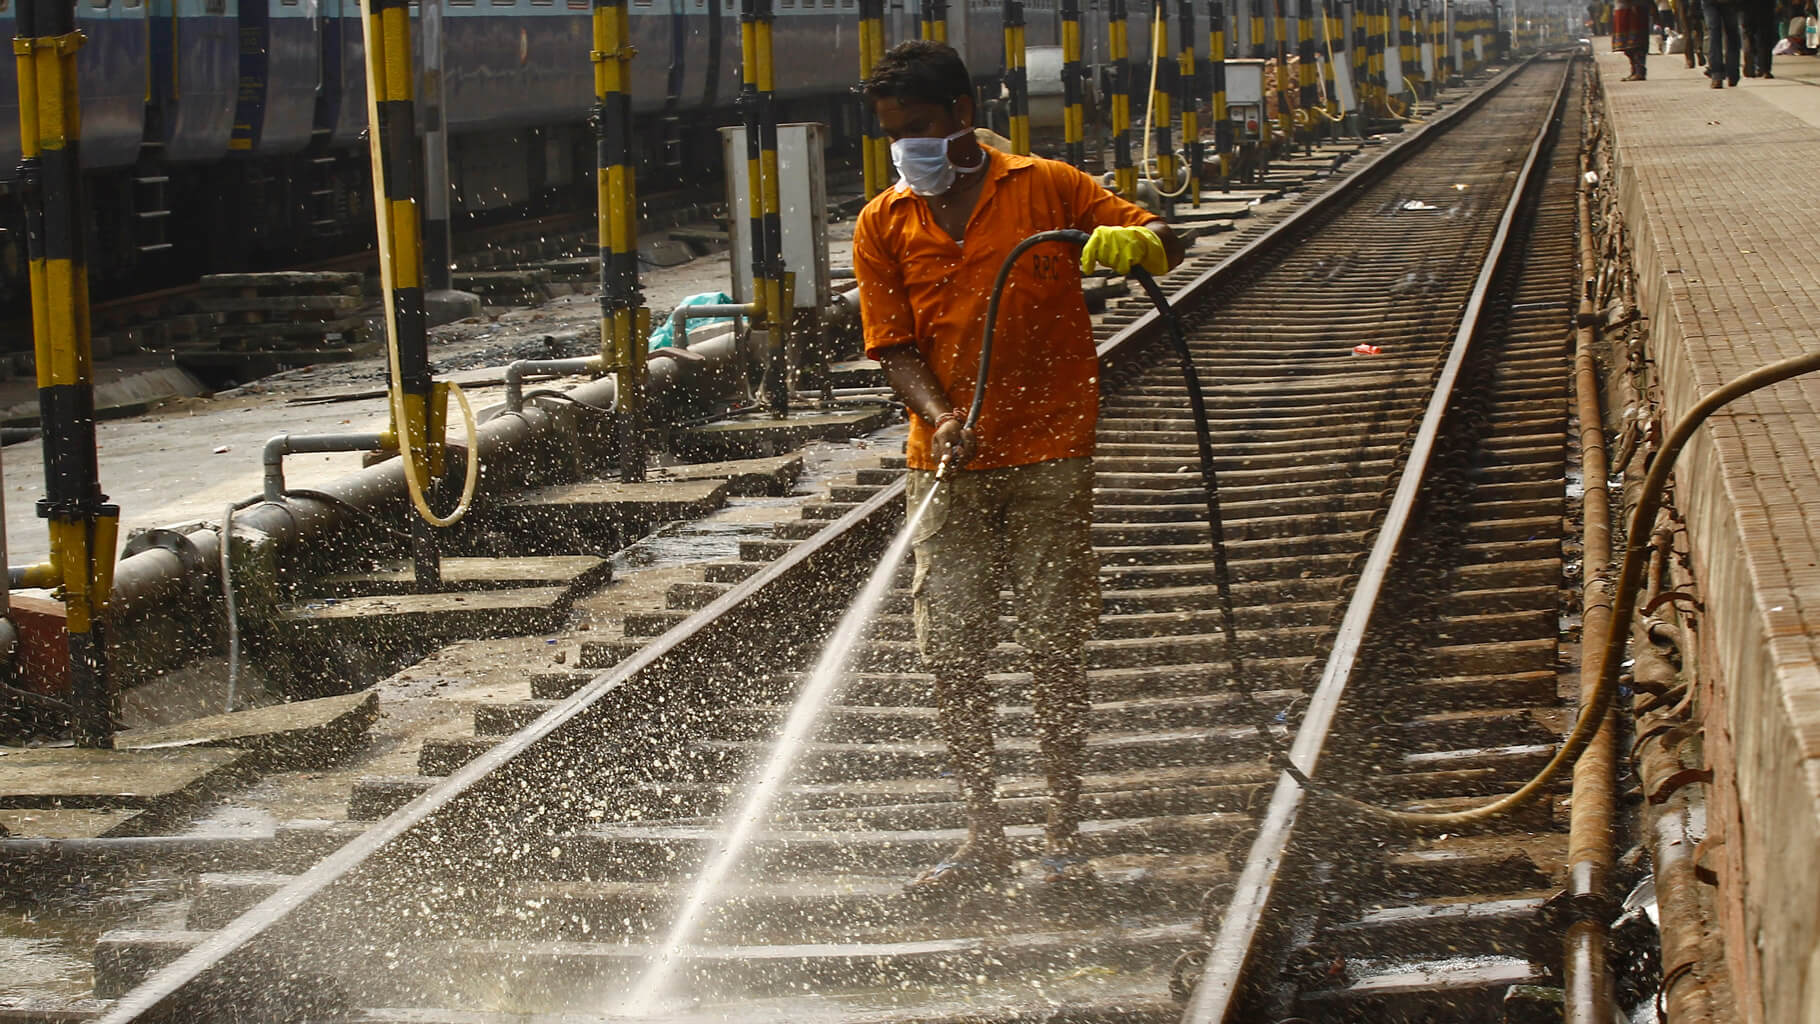 Gujarat Has The Cleanest Railway Stations While Bihar And UP Have The Dirtiest